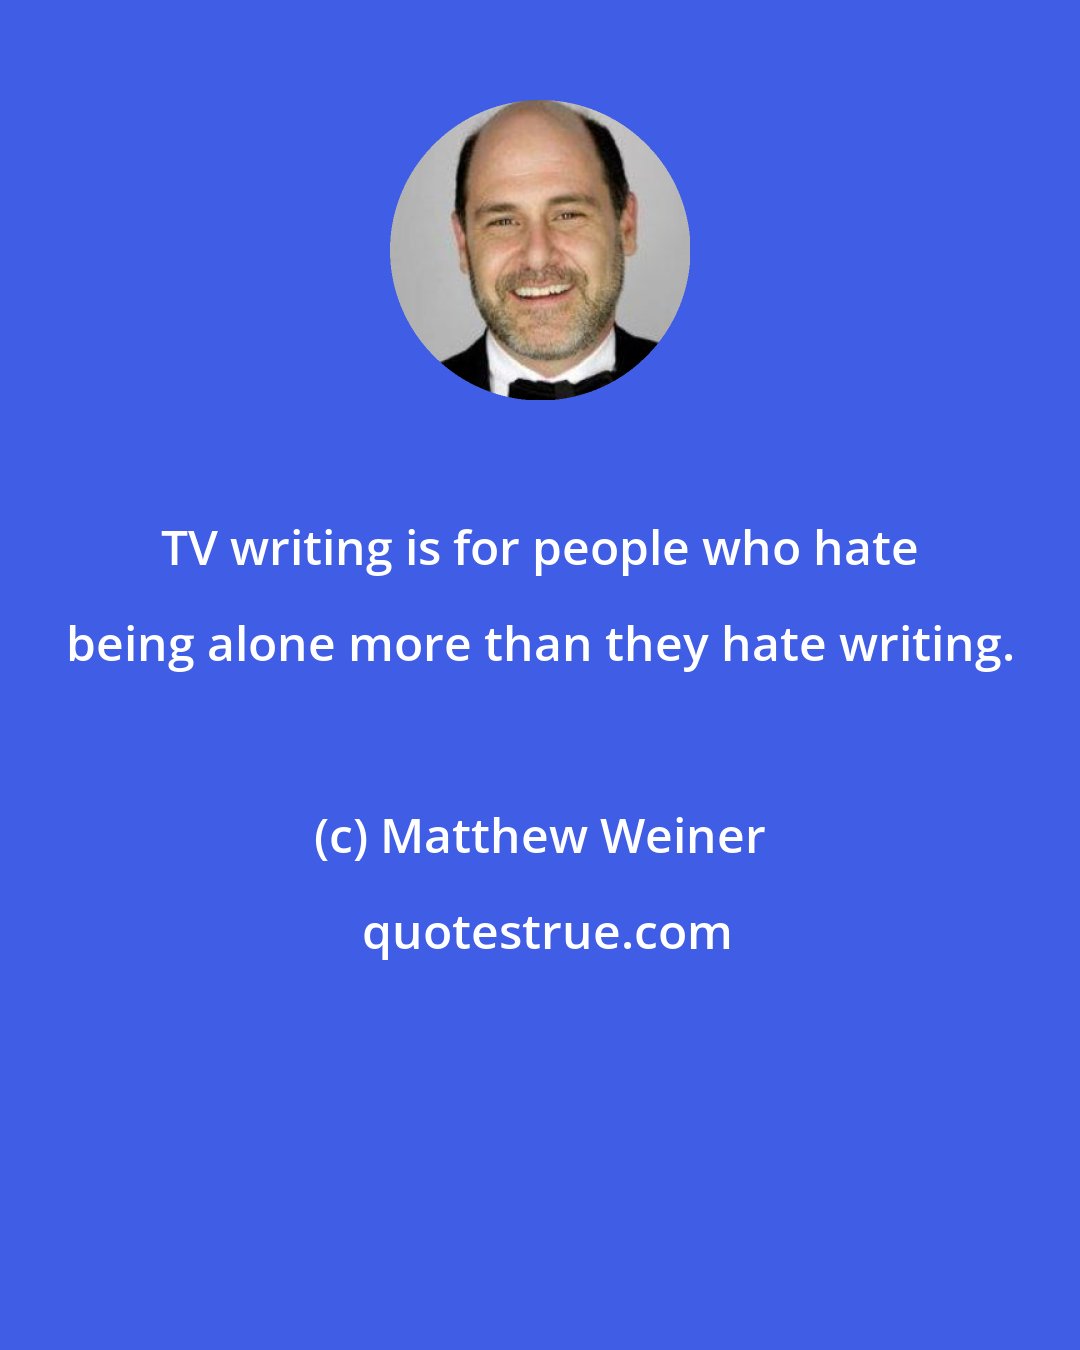 Matthew Weiner: TV writing is for people who hate being alone more than they hate writing.